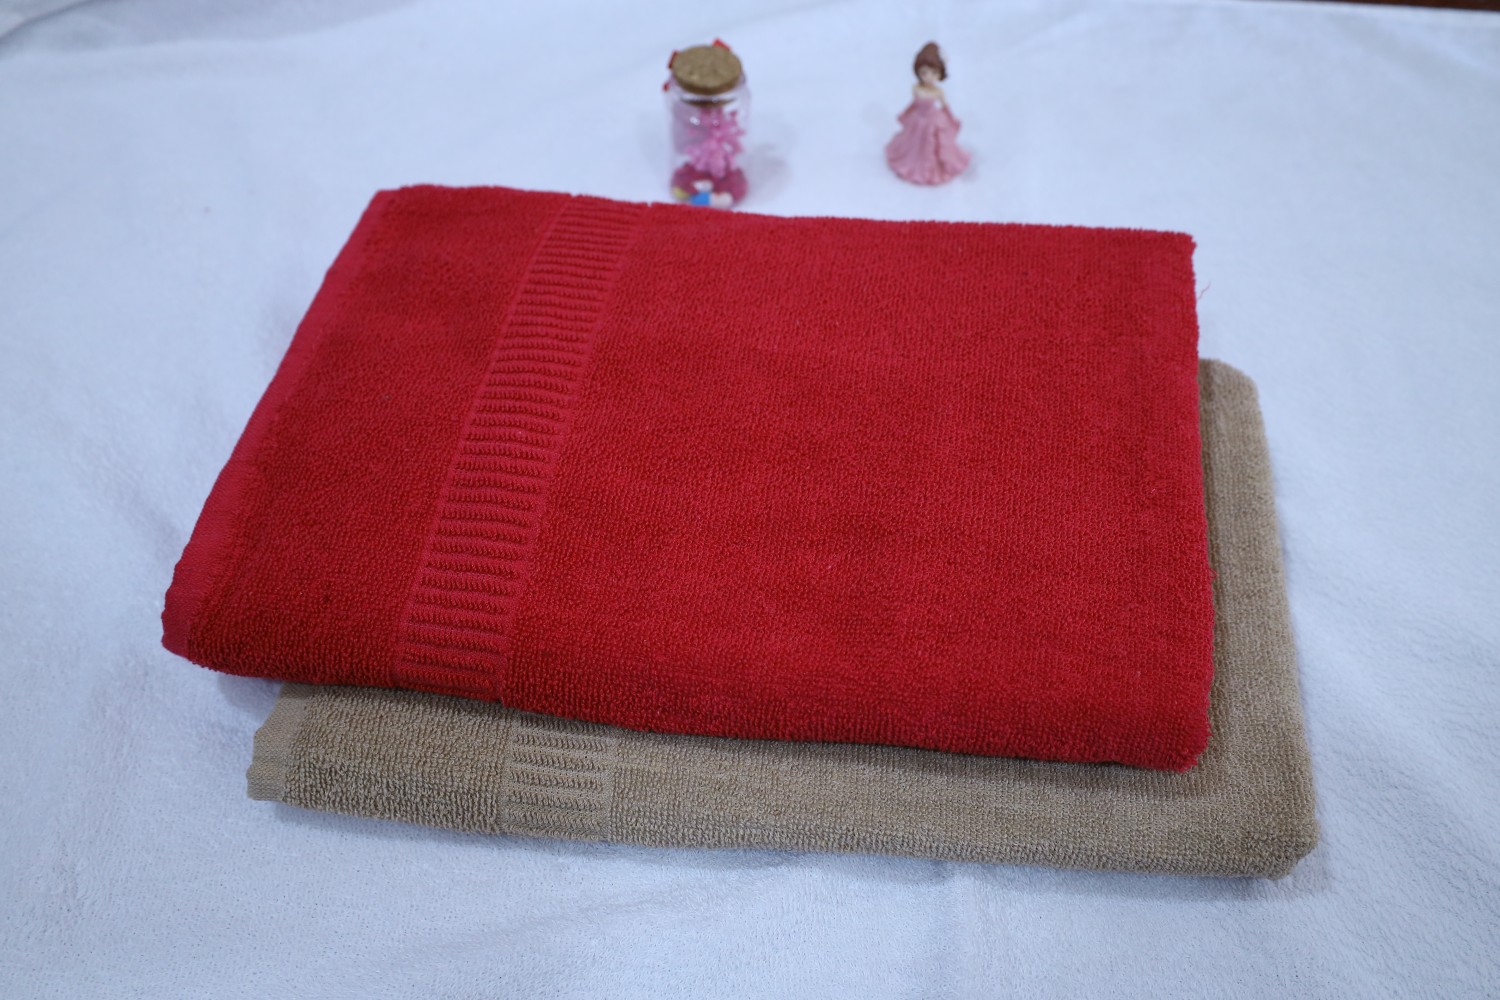 Taurusent Super Soft 100% Cotton High Absorbing Turkey Bath Towel, Size: 30x60 inches (450 GSM) - Pack of 2 (Red & Beige)